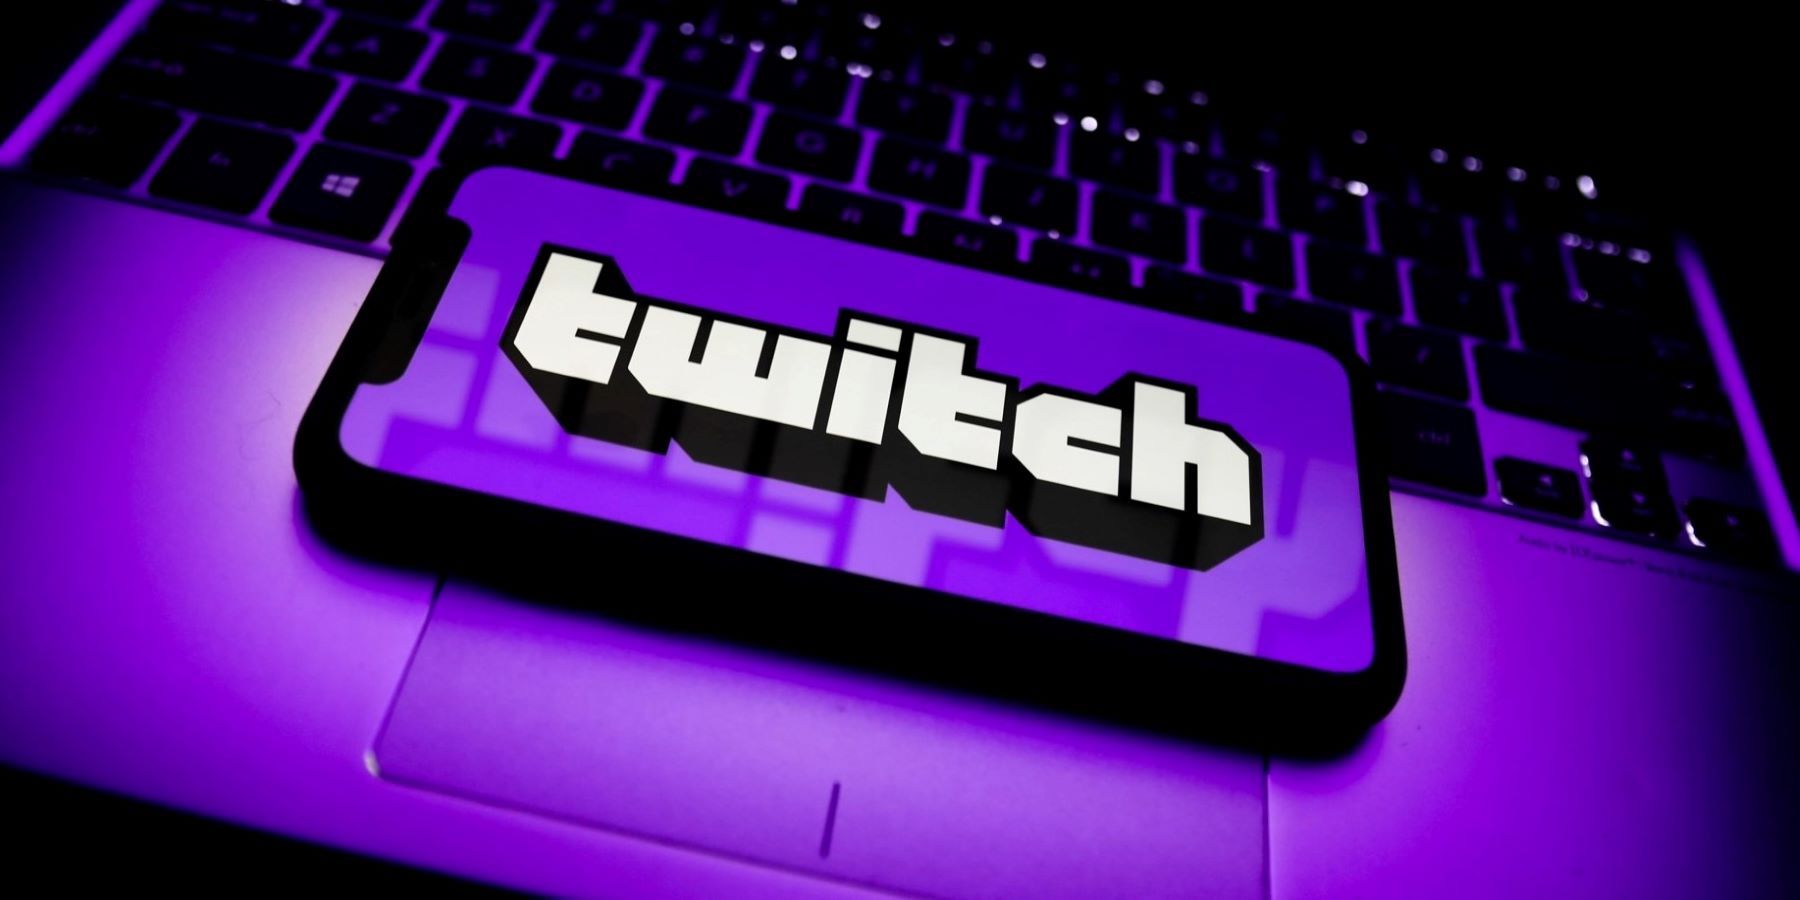 A purple cellphone with Twitch's name on its screen resting on the trackpad of a laptop